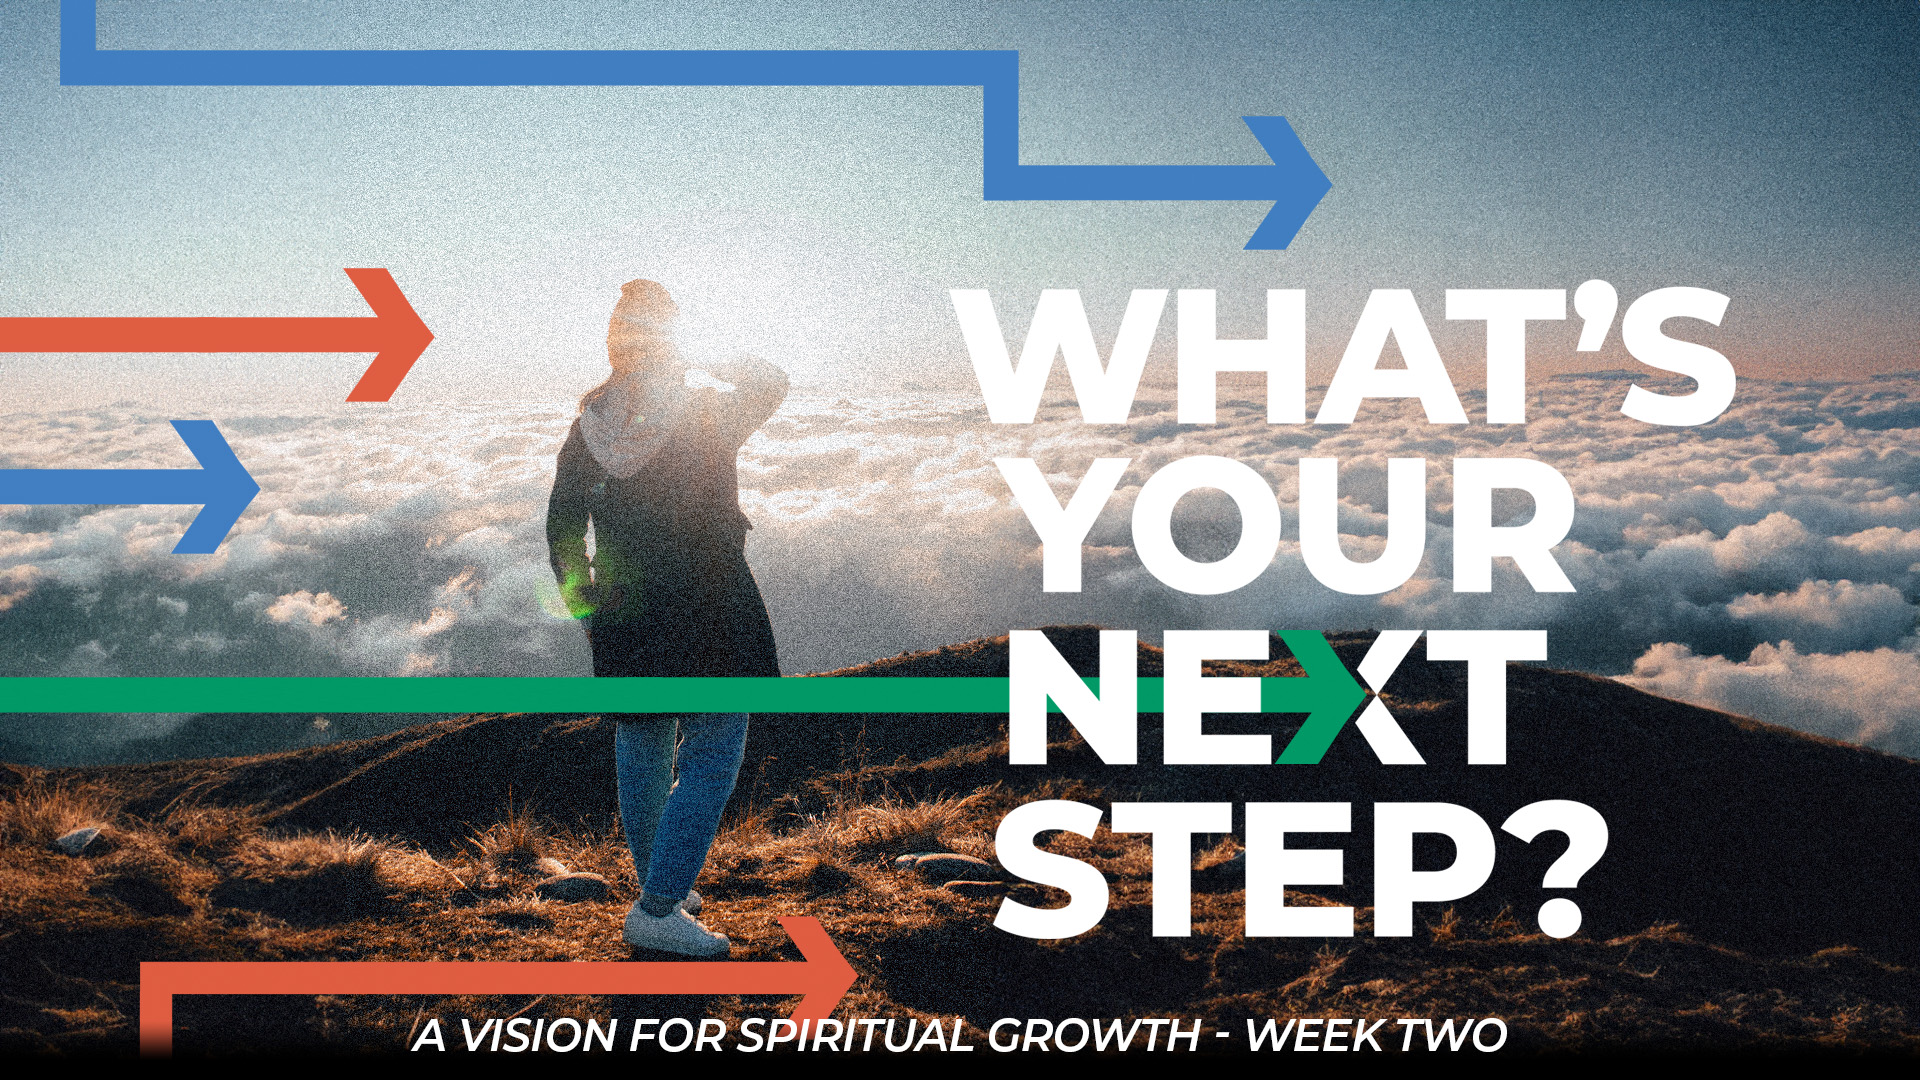 A Vision for Spiritual Growth - Week Two